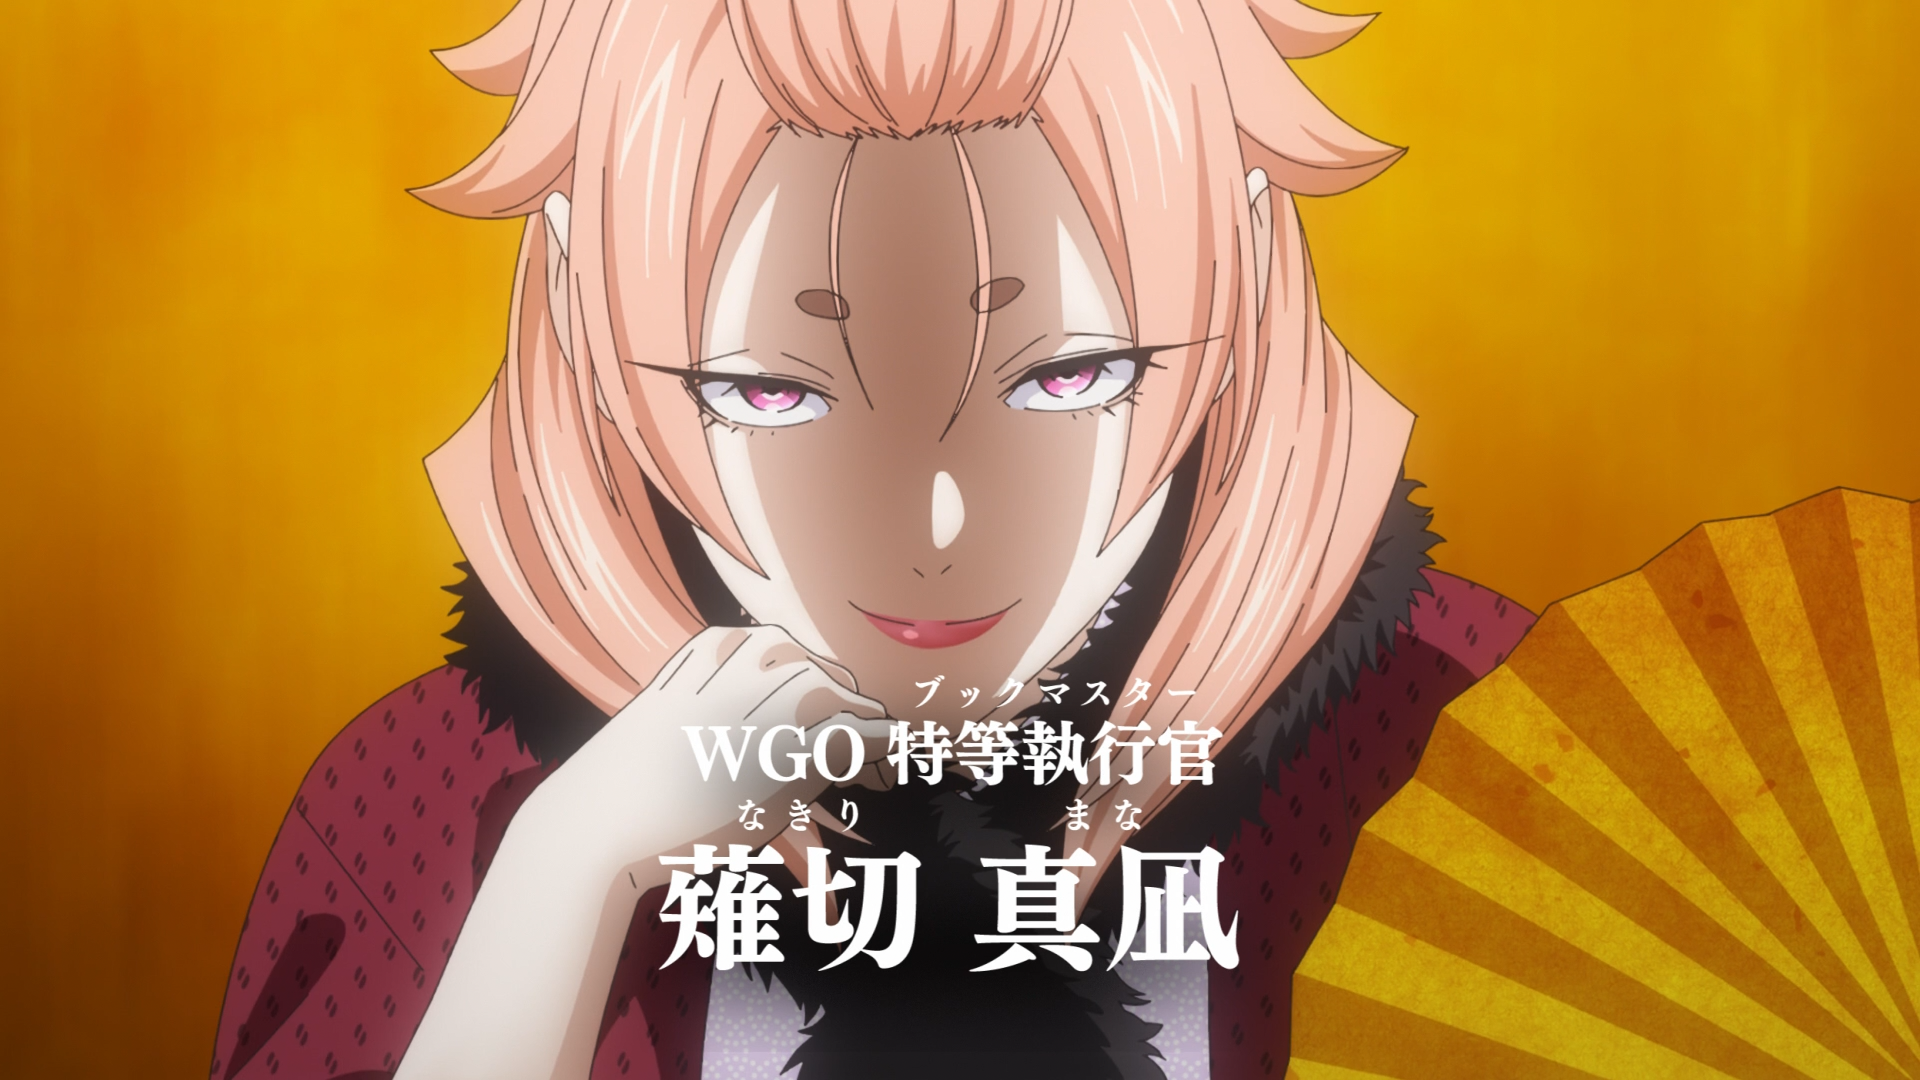 Food Wars Finally Introduces Soma's Mother to the Anime